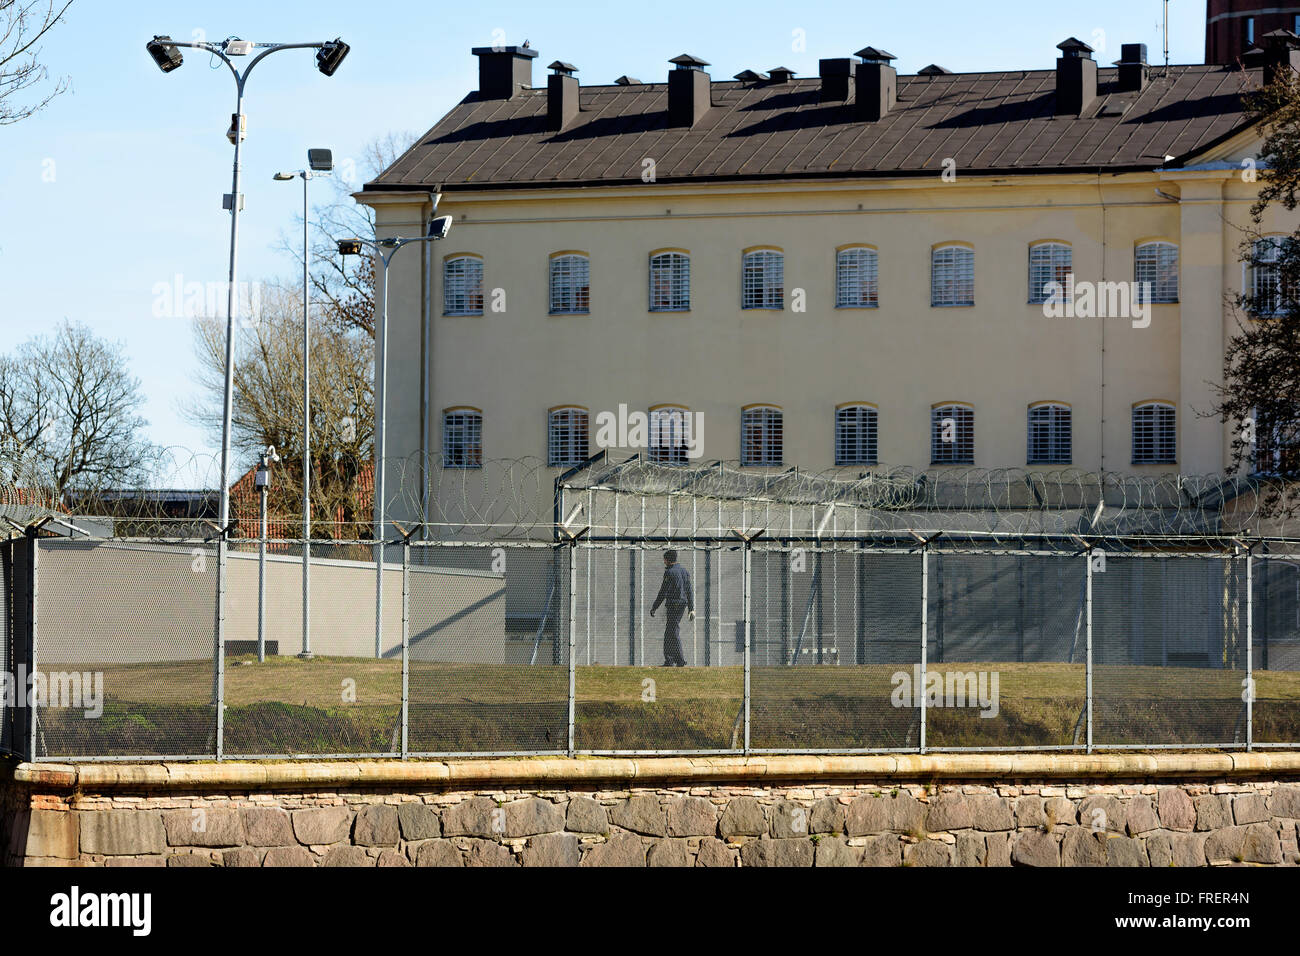 Kalmar, Sweden - March 17, 2016: The prison building with the exercise yard and surrounding barbed and netted fence. People walk Stock Photo